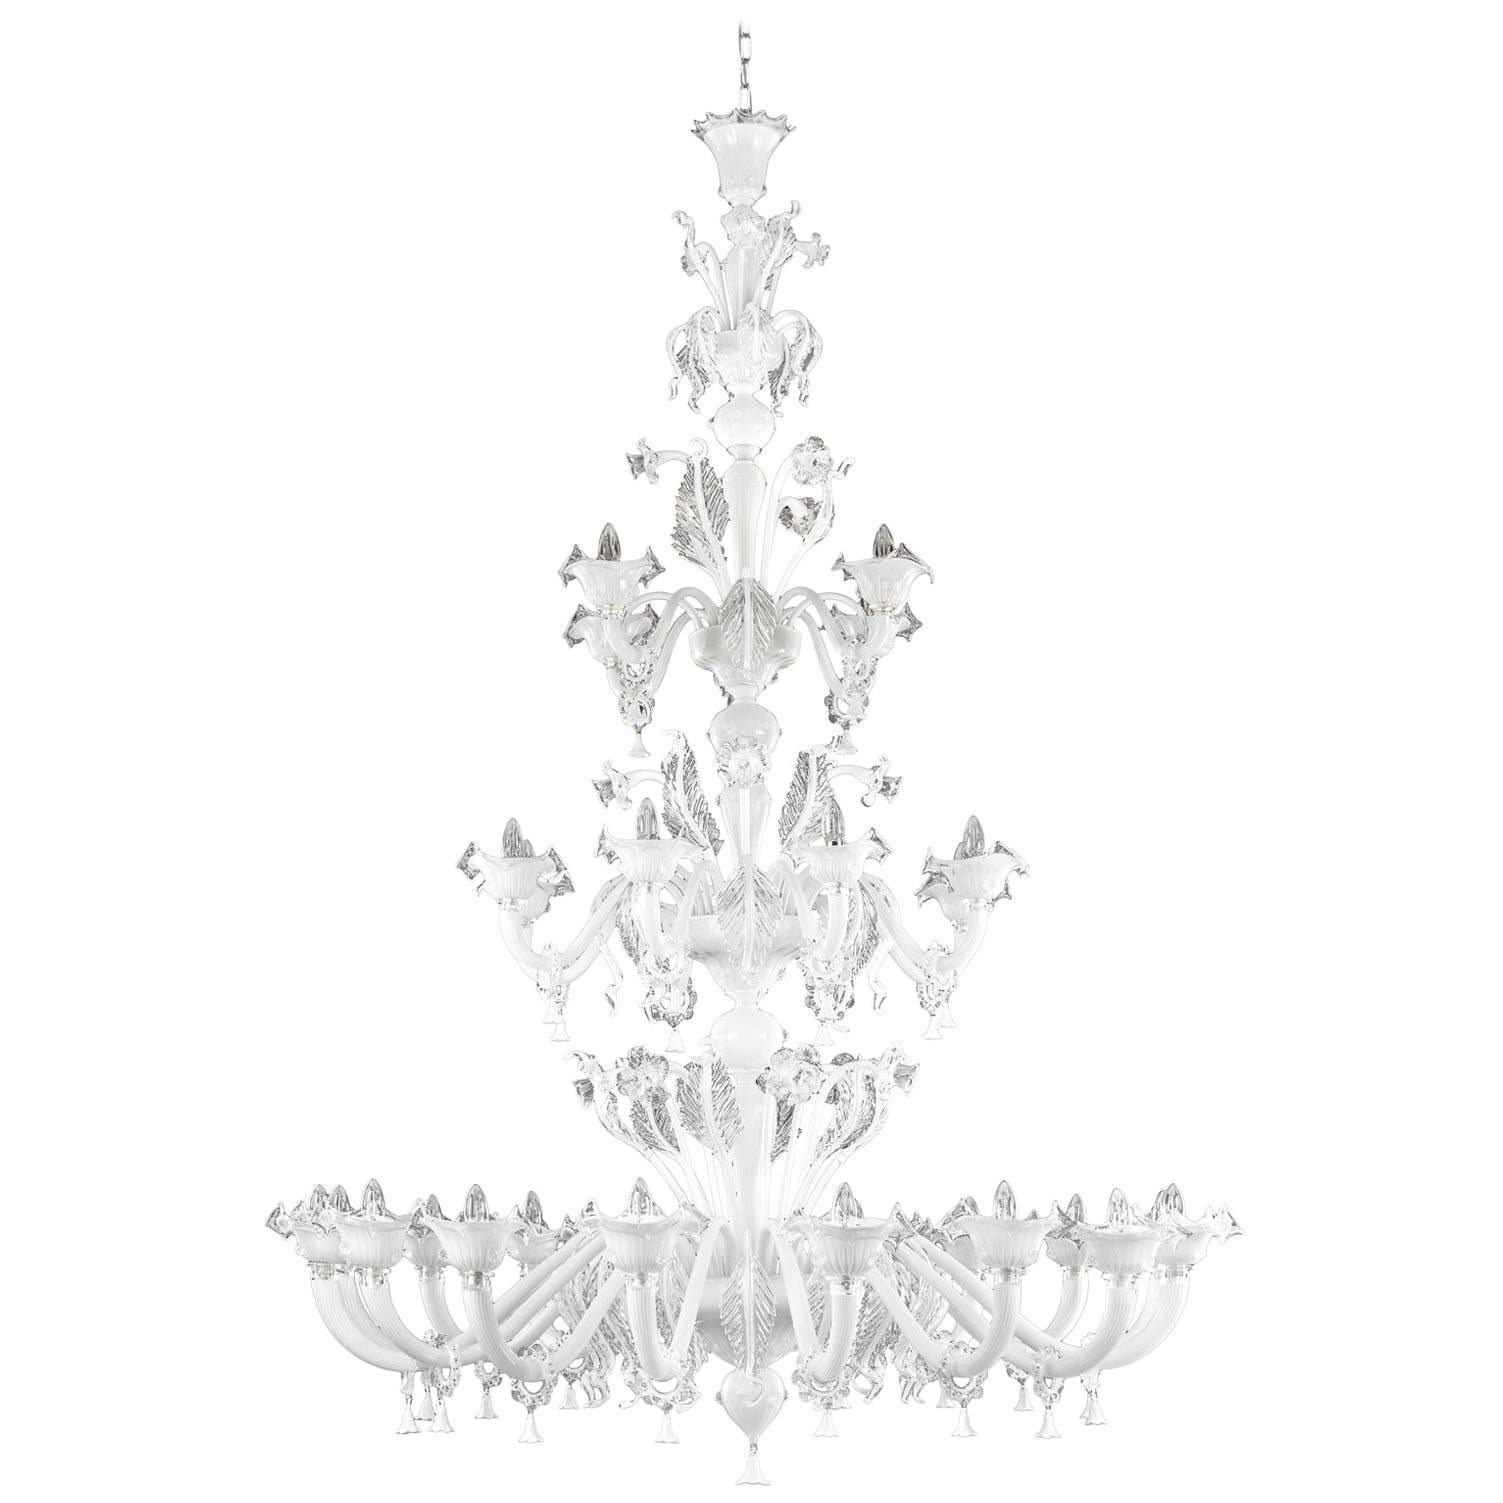 Classic Chandelier 16+8+4 arms 3 Tiers Encased white Murano Glass by Multiforme